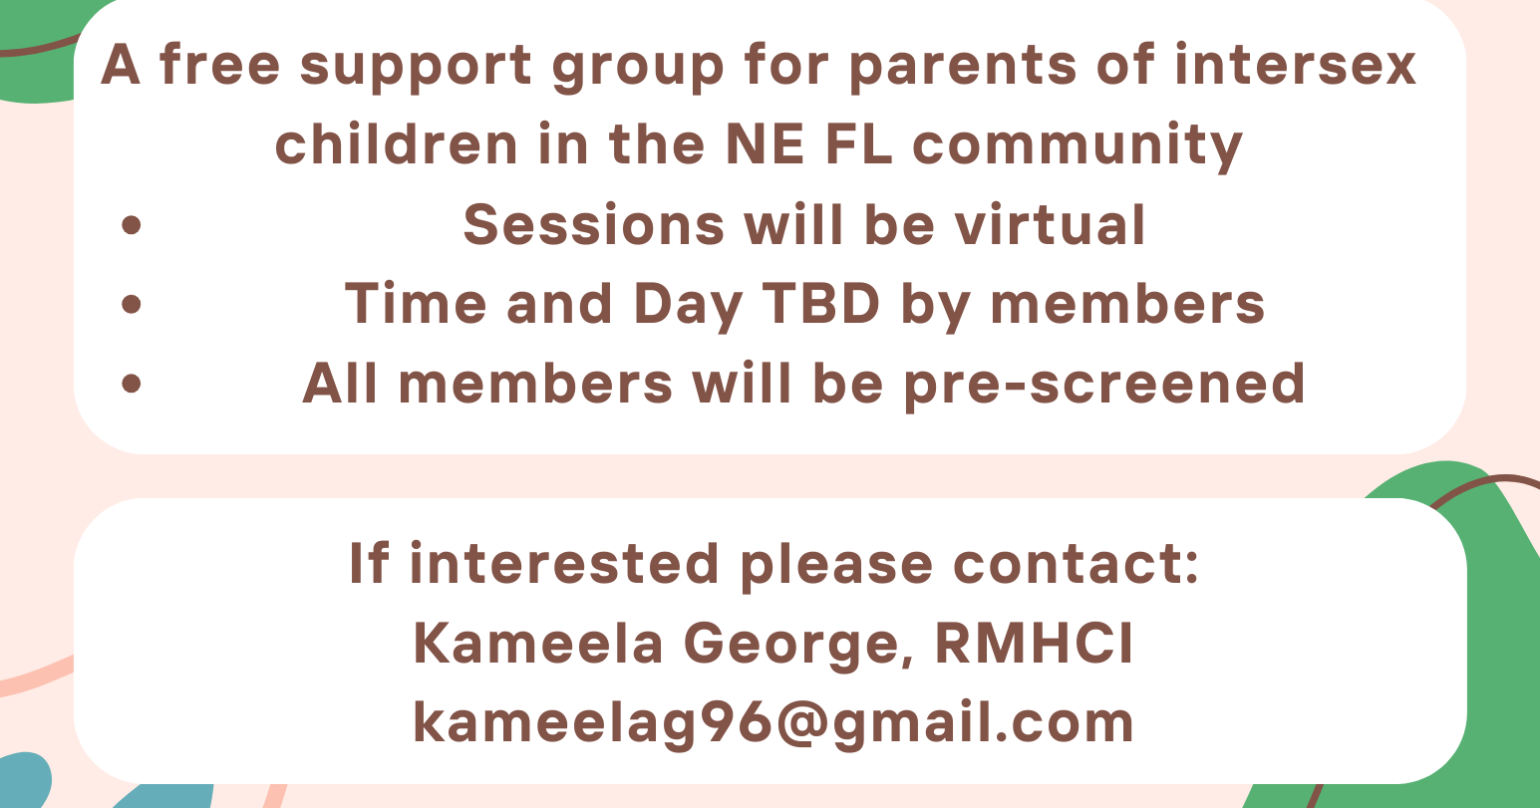 Parents of Intersex Children – Support Group. Free!